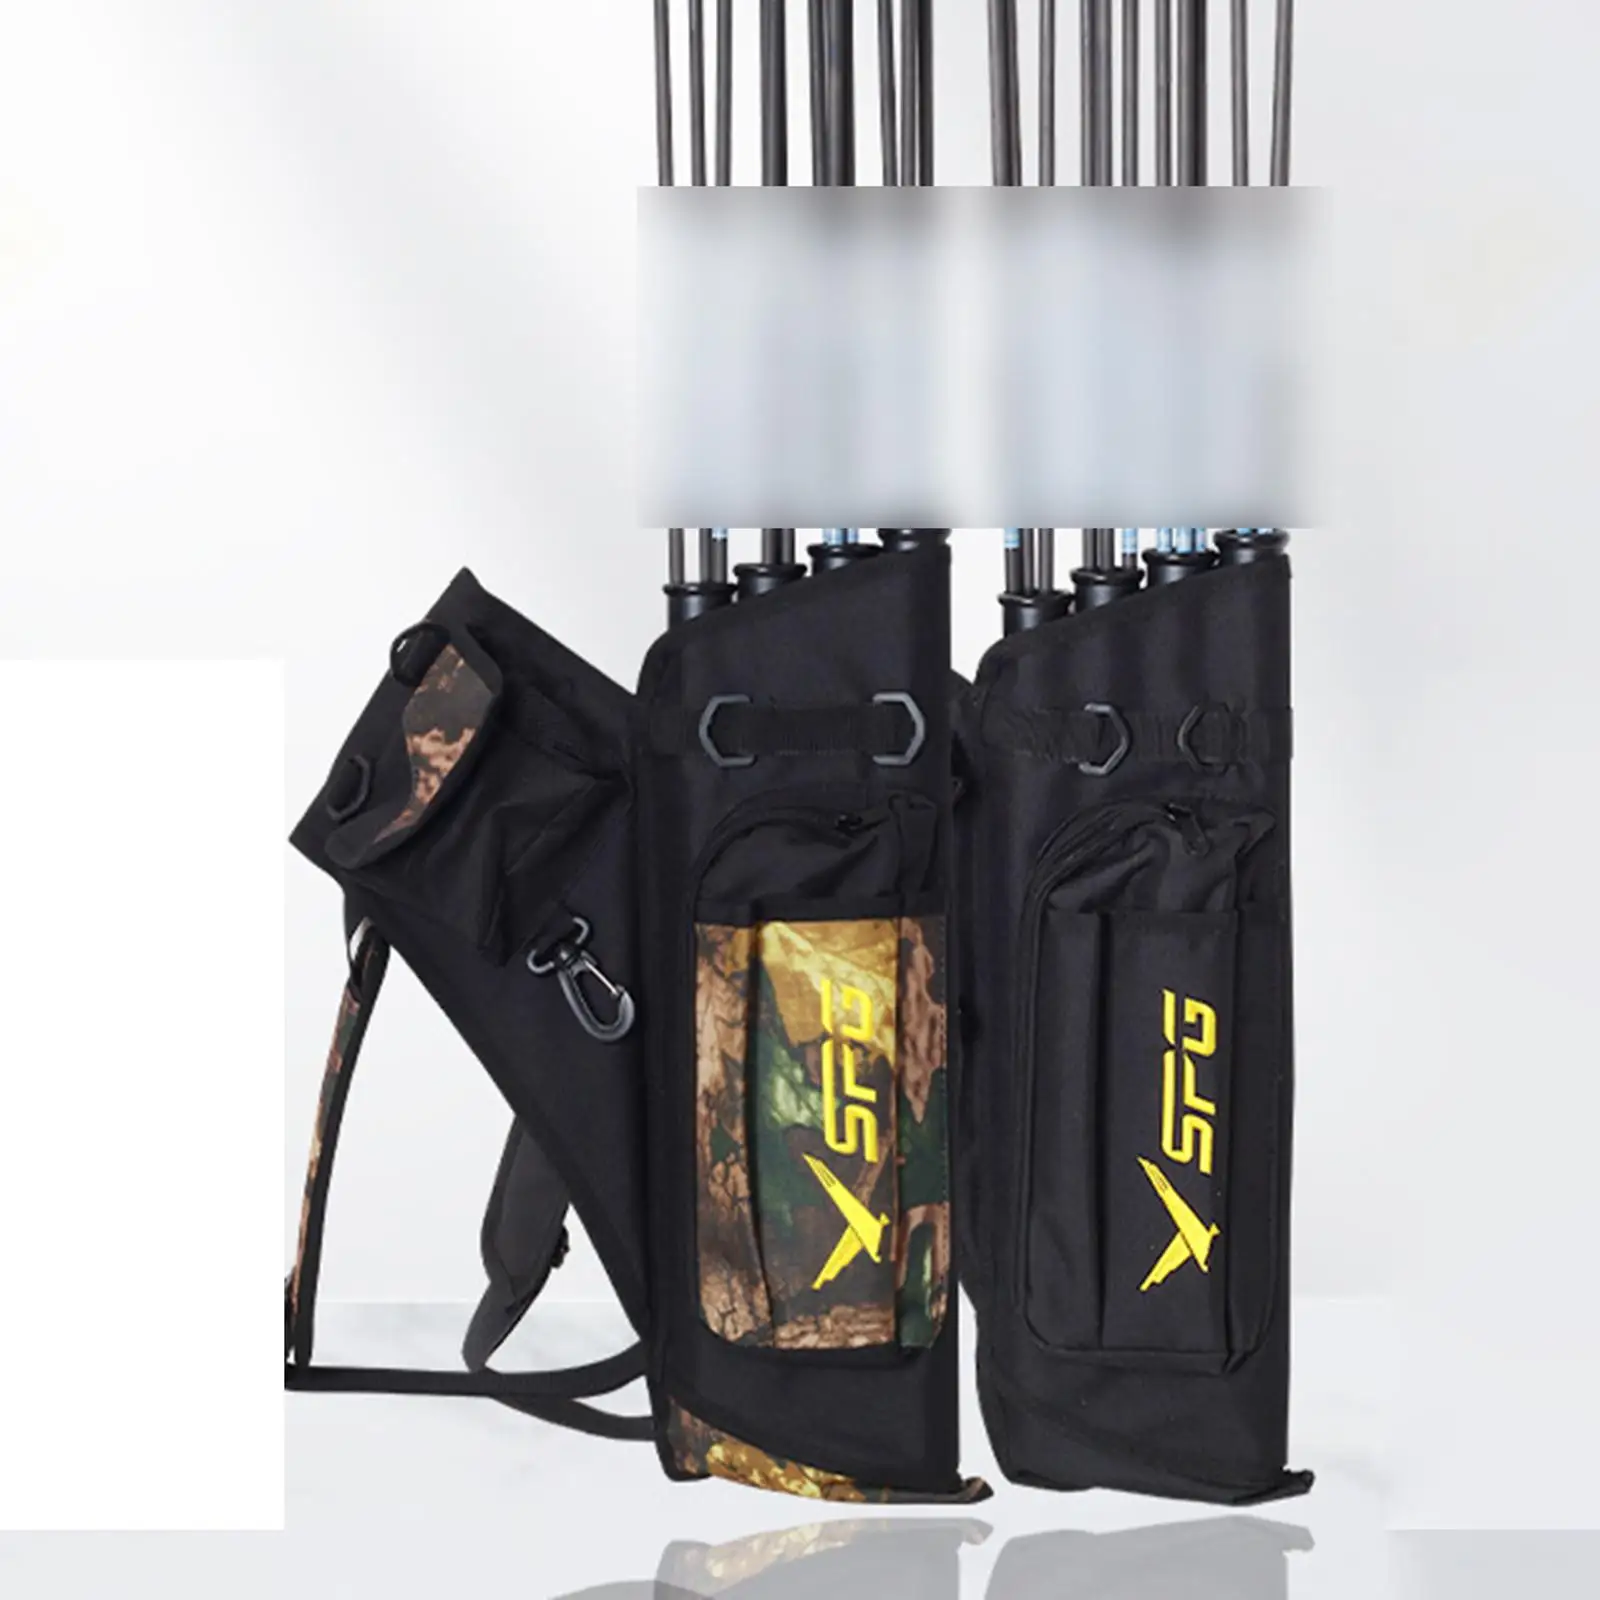   Quiver Target Quiver Bag for Hunting   Training Bow Practicing